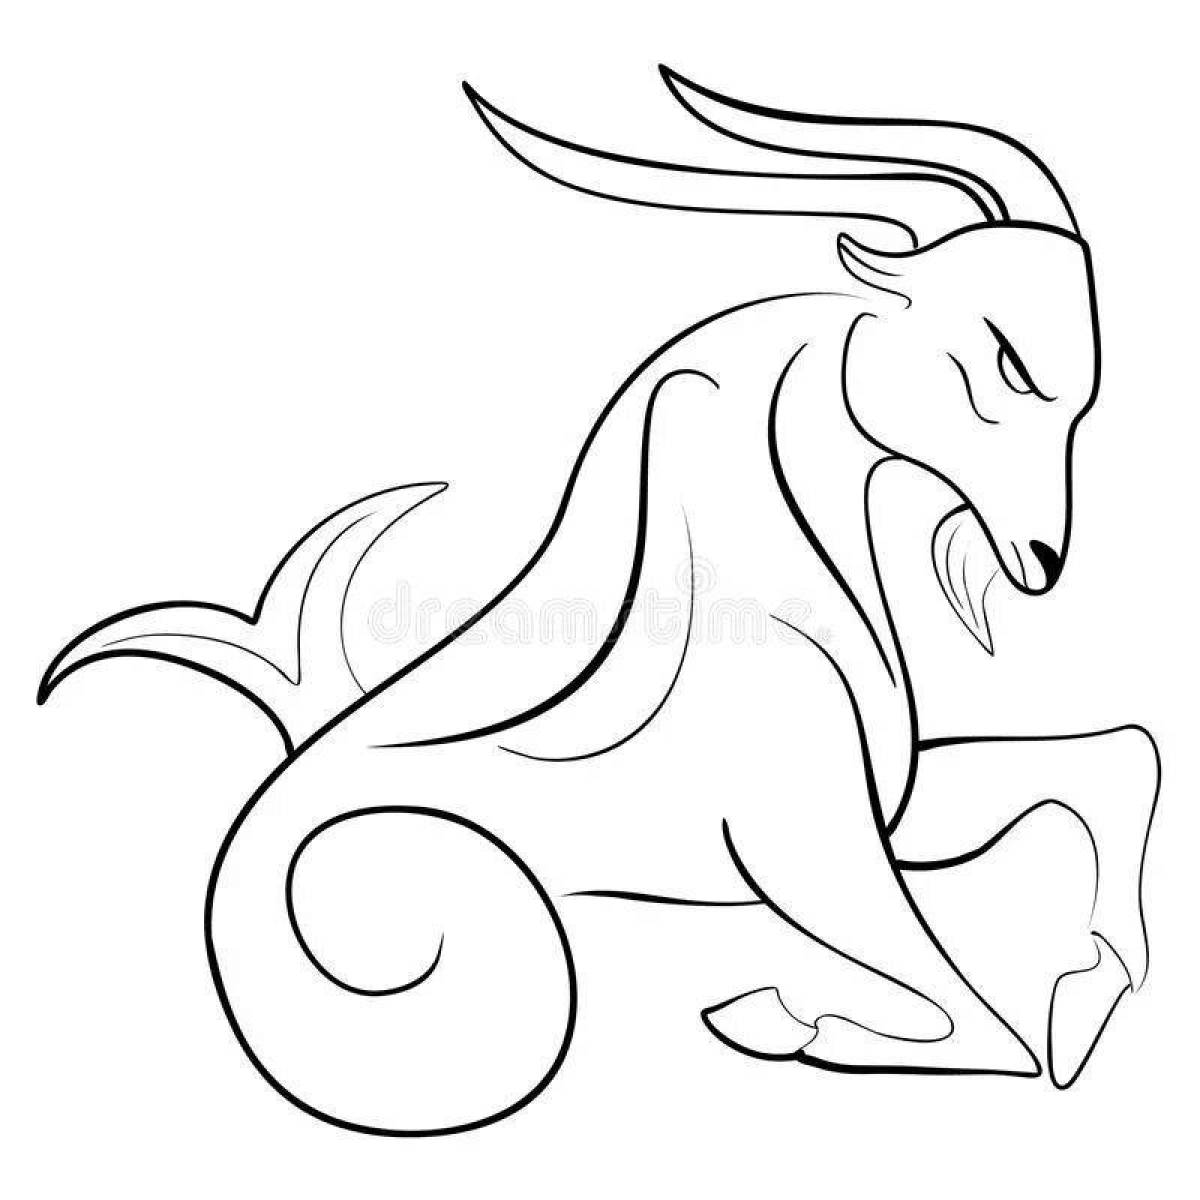 Great capricorn coloring page